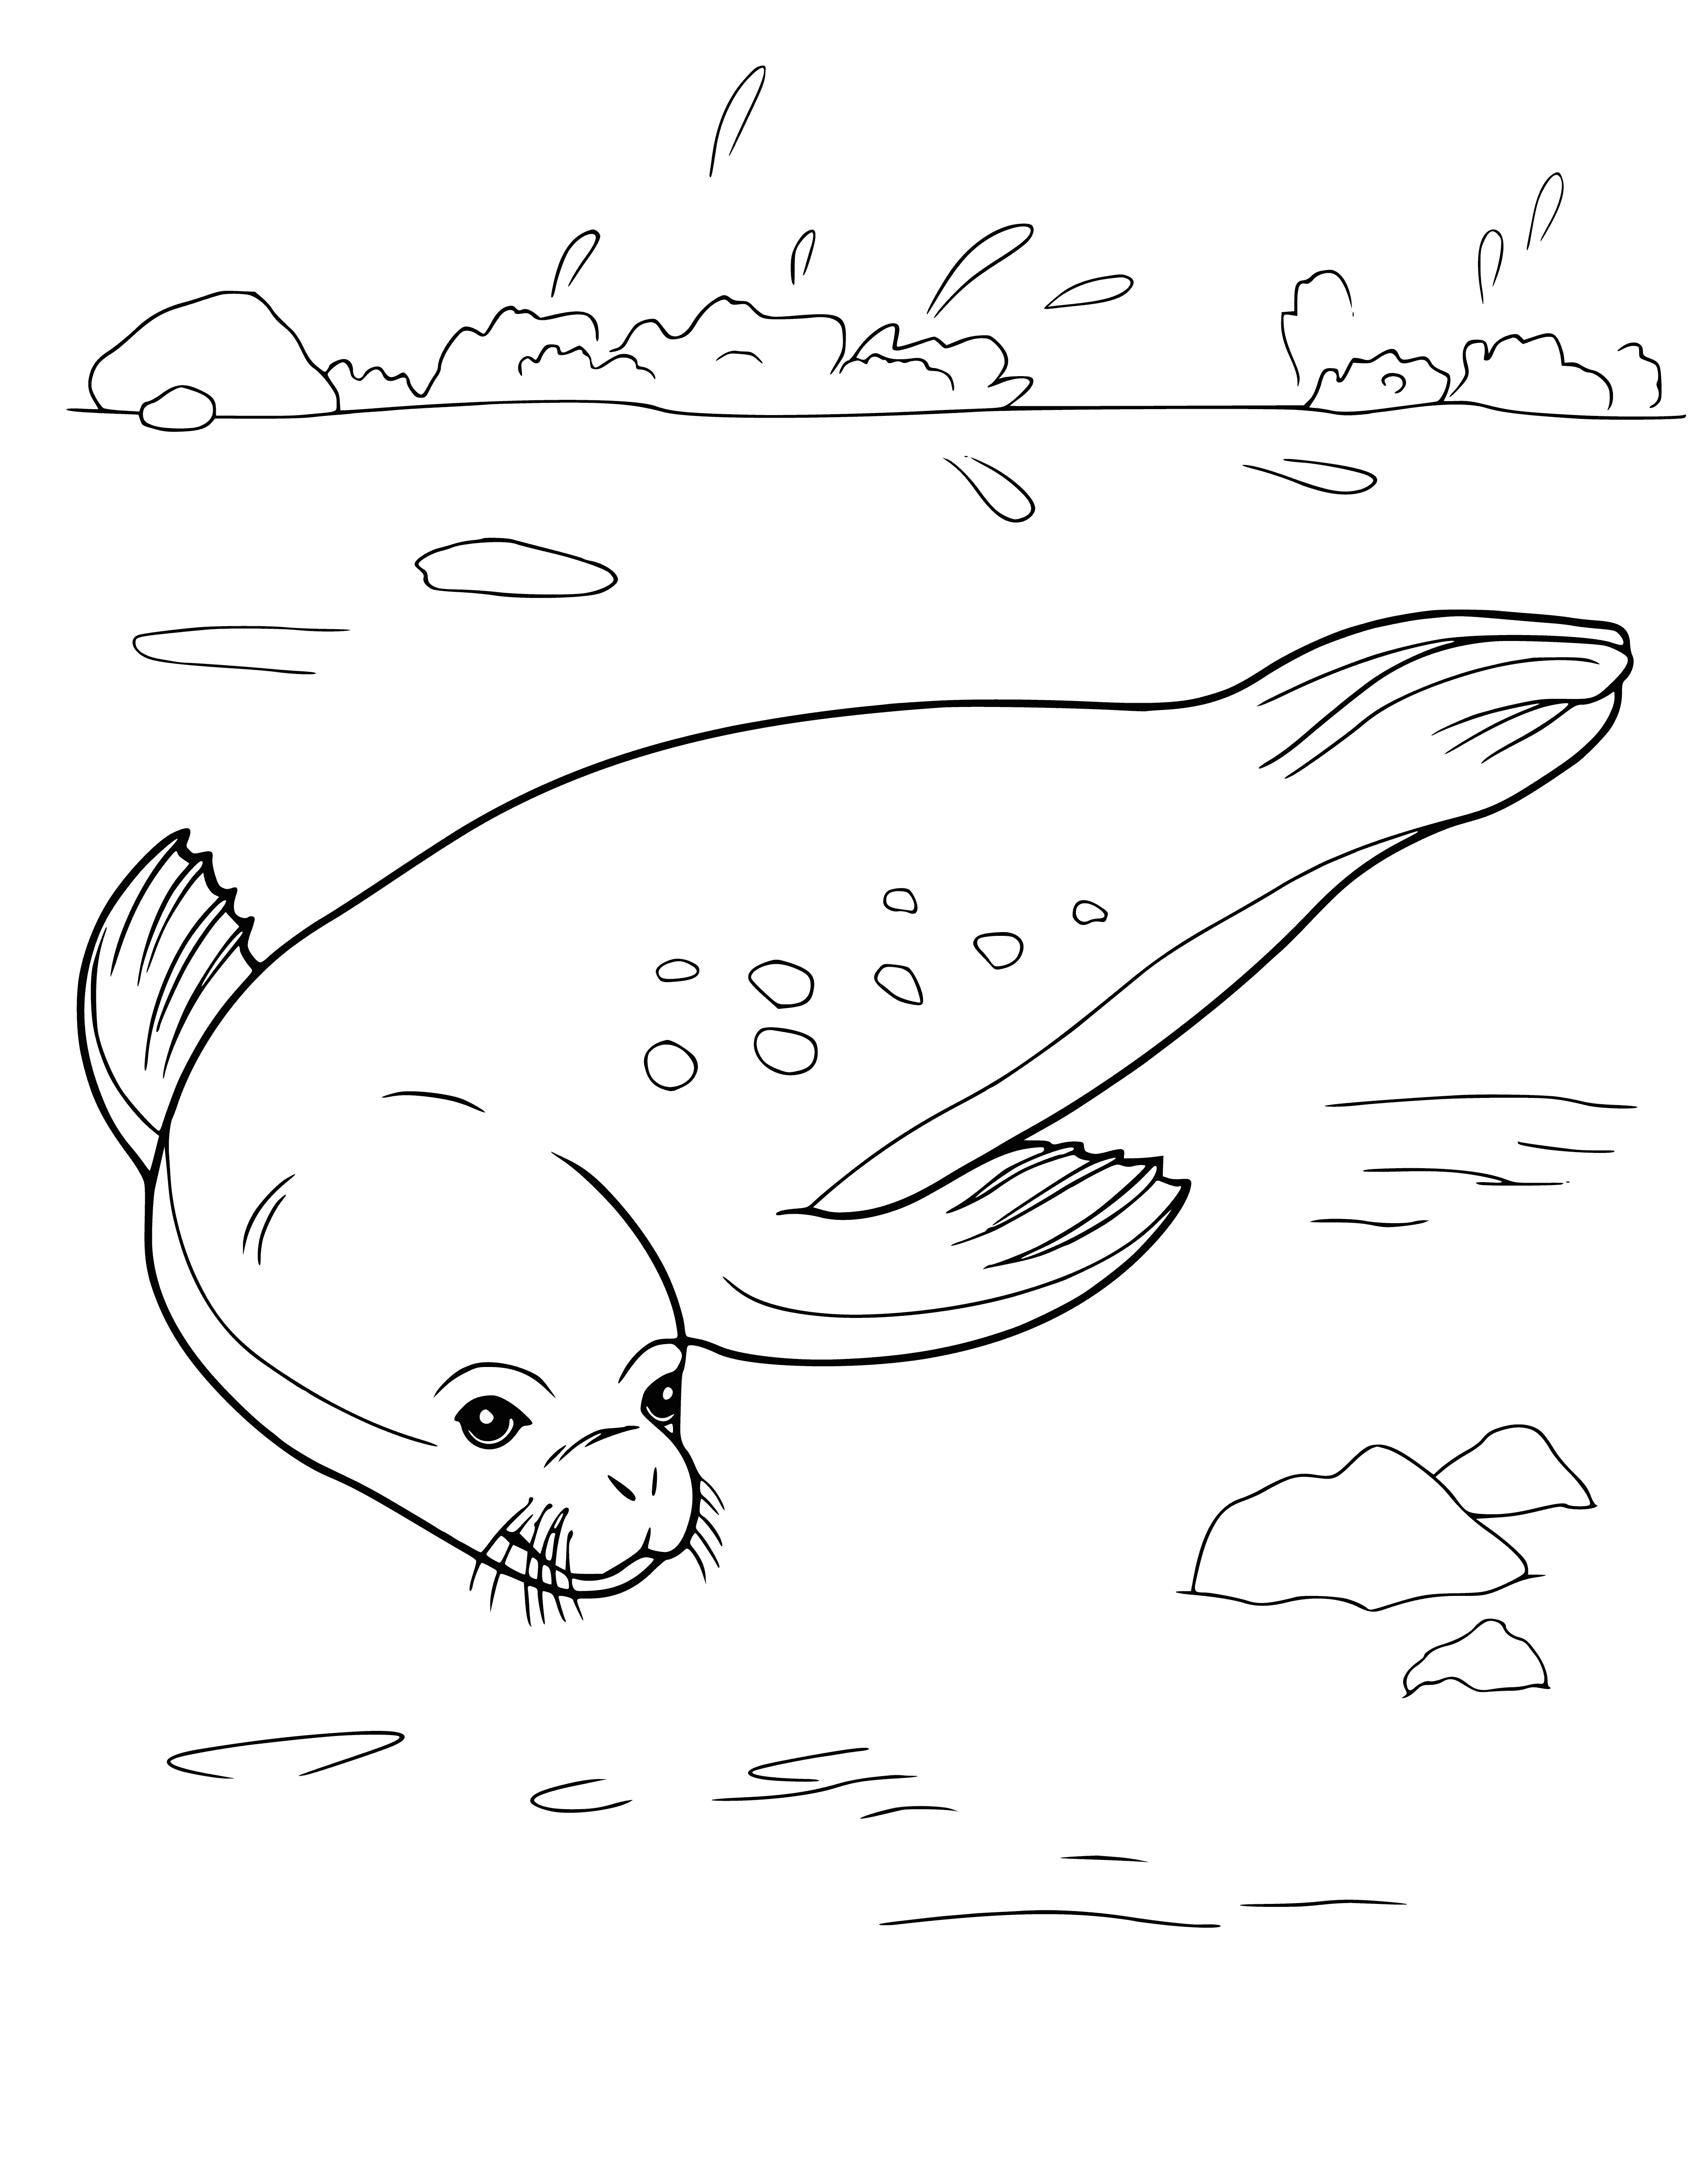 Seal coloring page